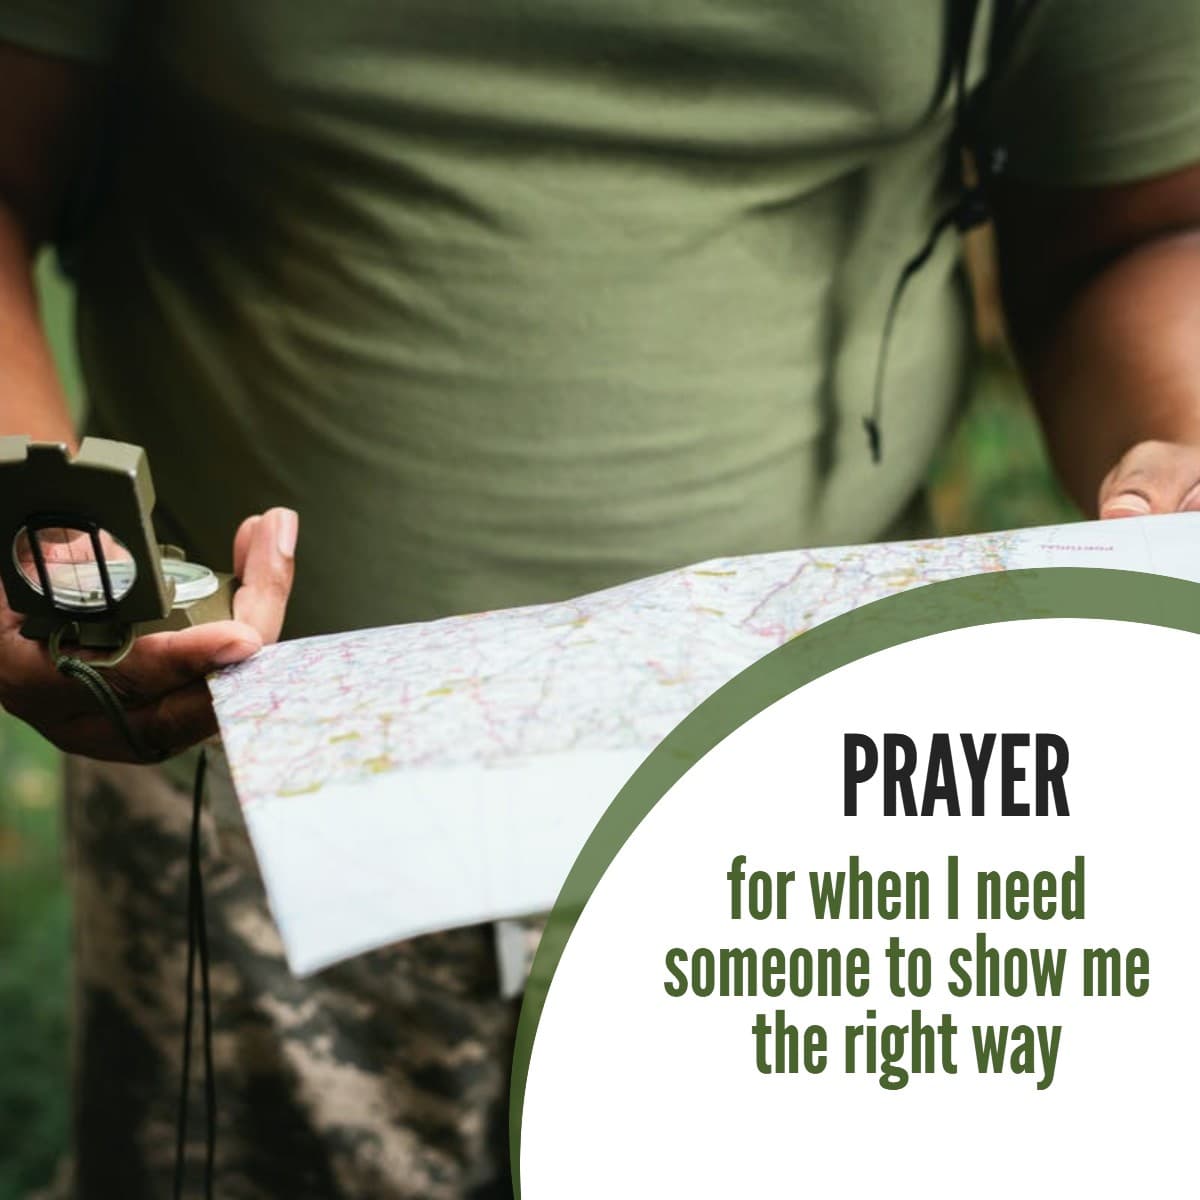 Prayer for when I need someone to show me the right way